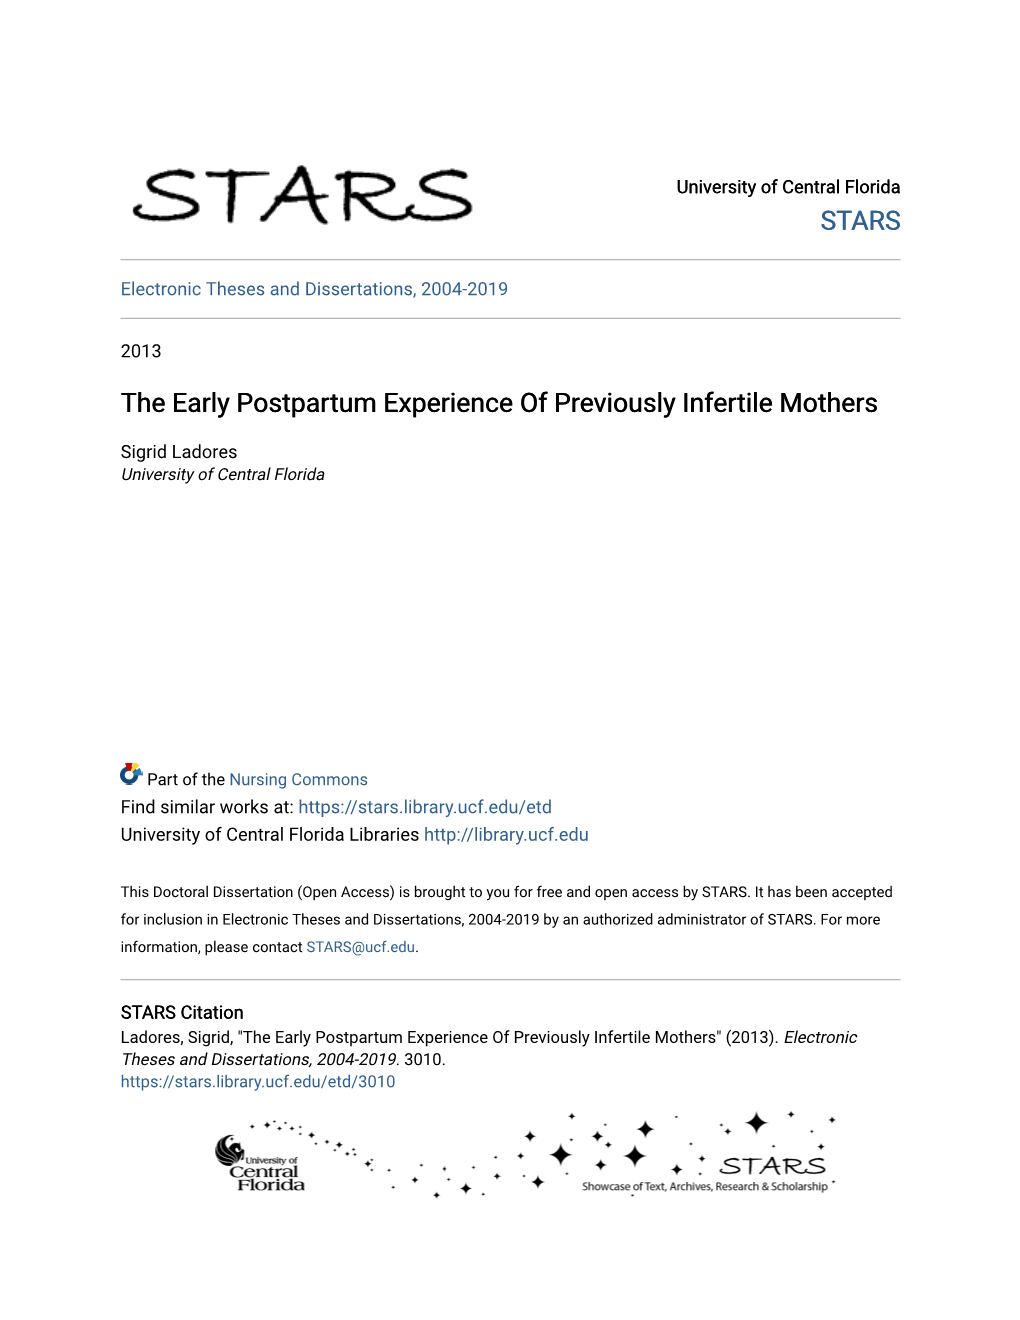 The Early Postpartum Experience of Previously Infertile Mothers